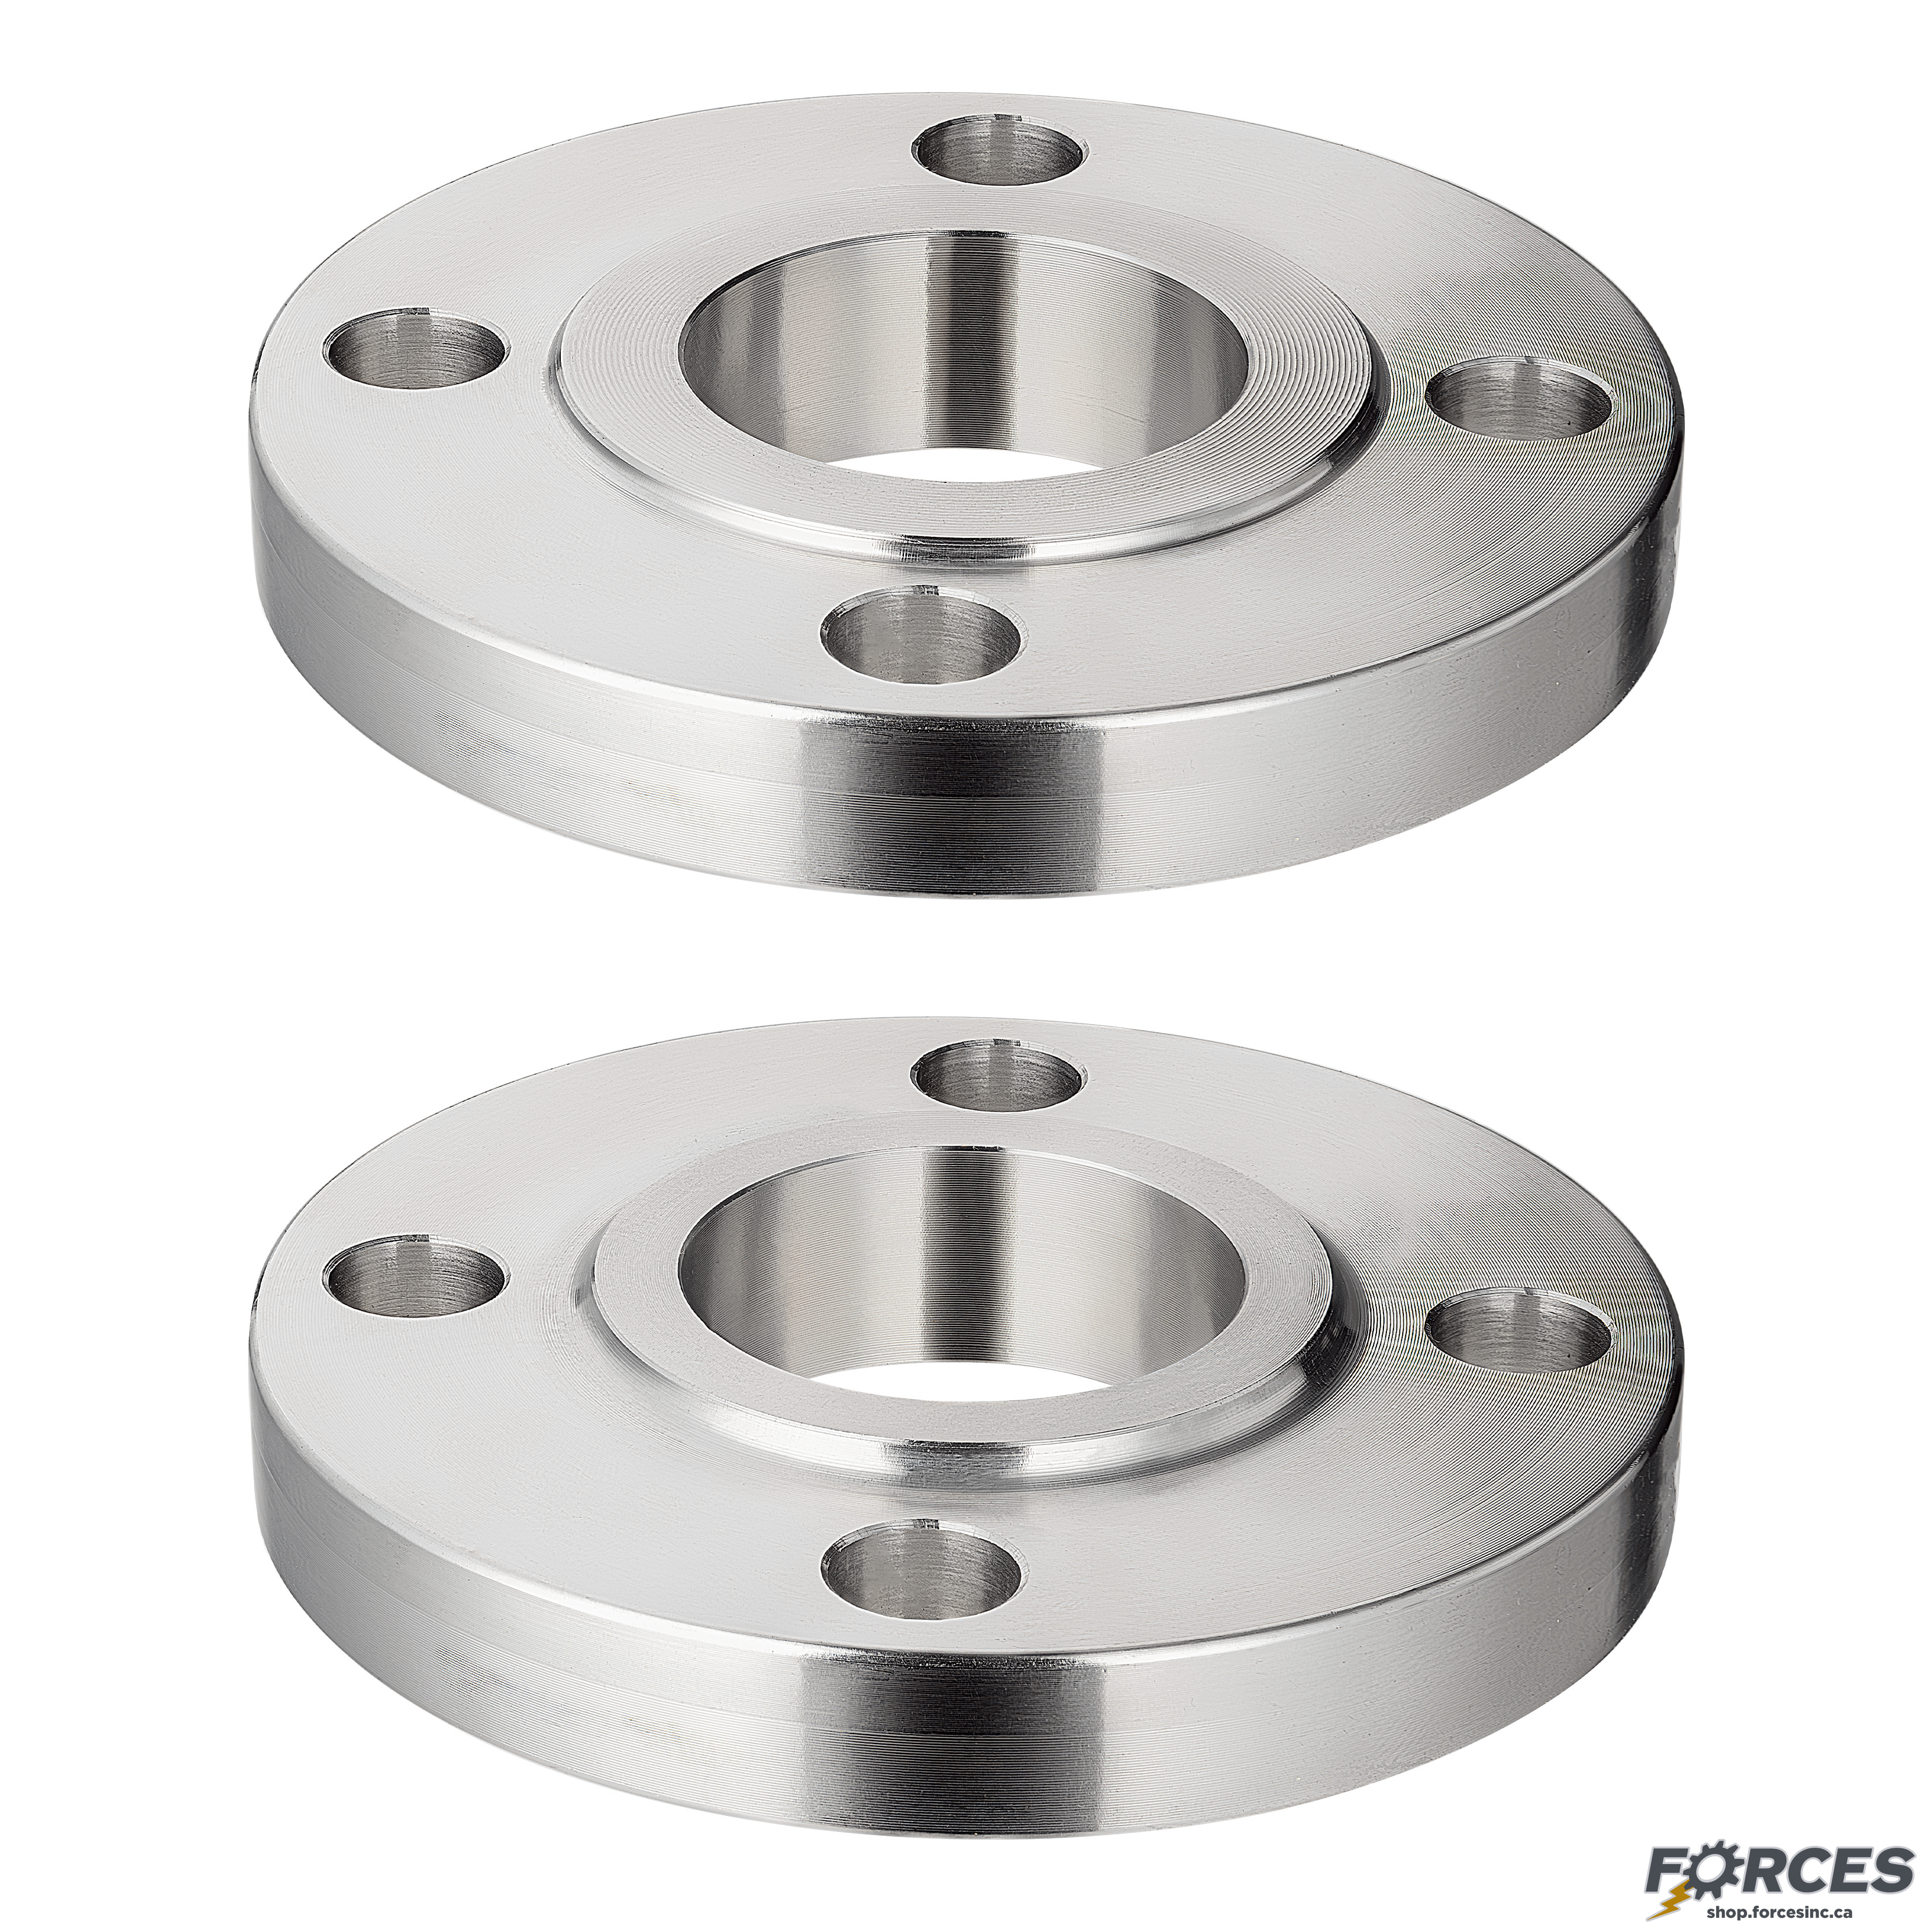 1-1/4" Slip-On Flange Class #150 - Stainless Steel 316 - Forces Inc